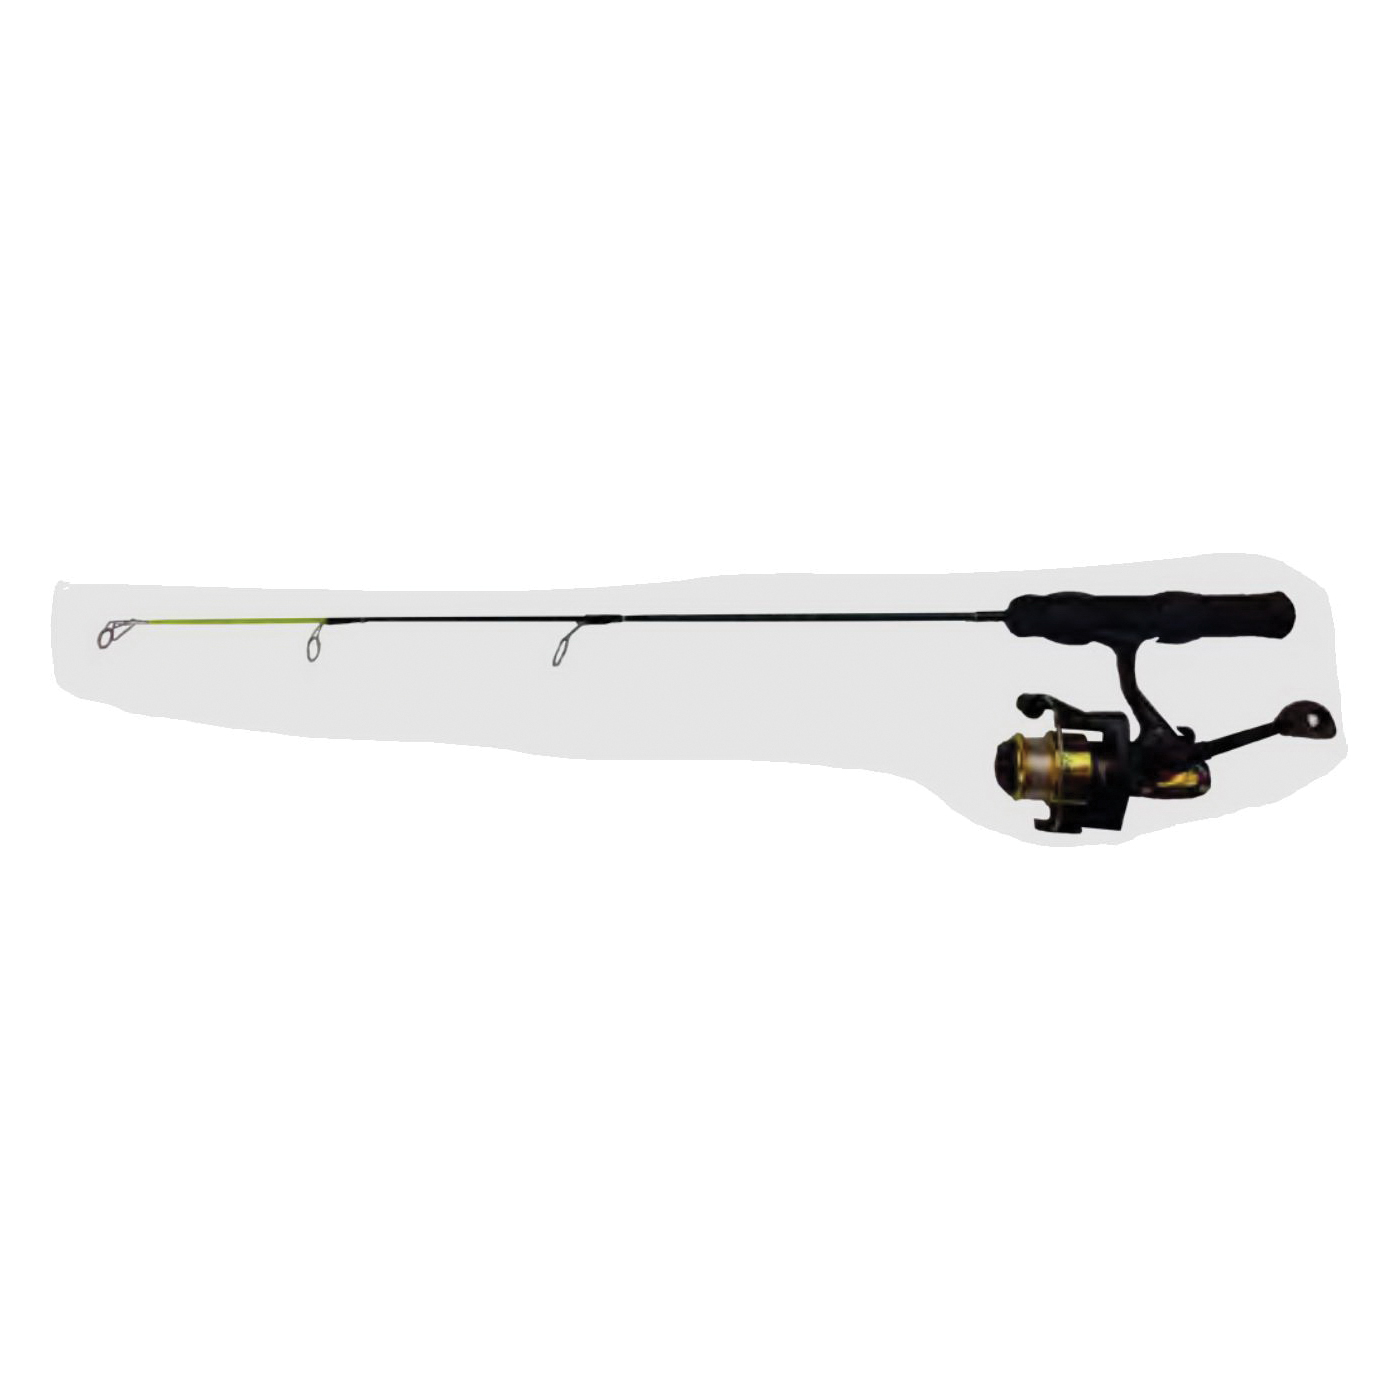 HT Enterprises Iceman Series ICL-24SC Iceman Ice Rod/Reel Combo, 24 in L Rod, 5.1:1 Gear Ratio, Graphite/Stainless Steel - 1